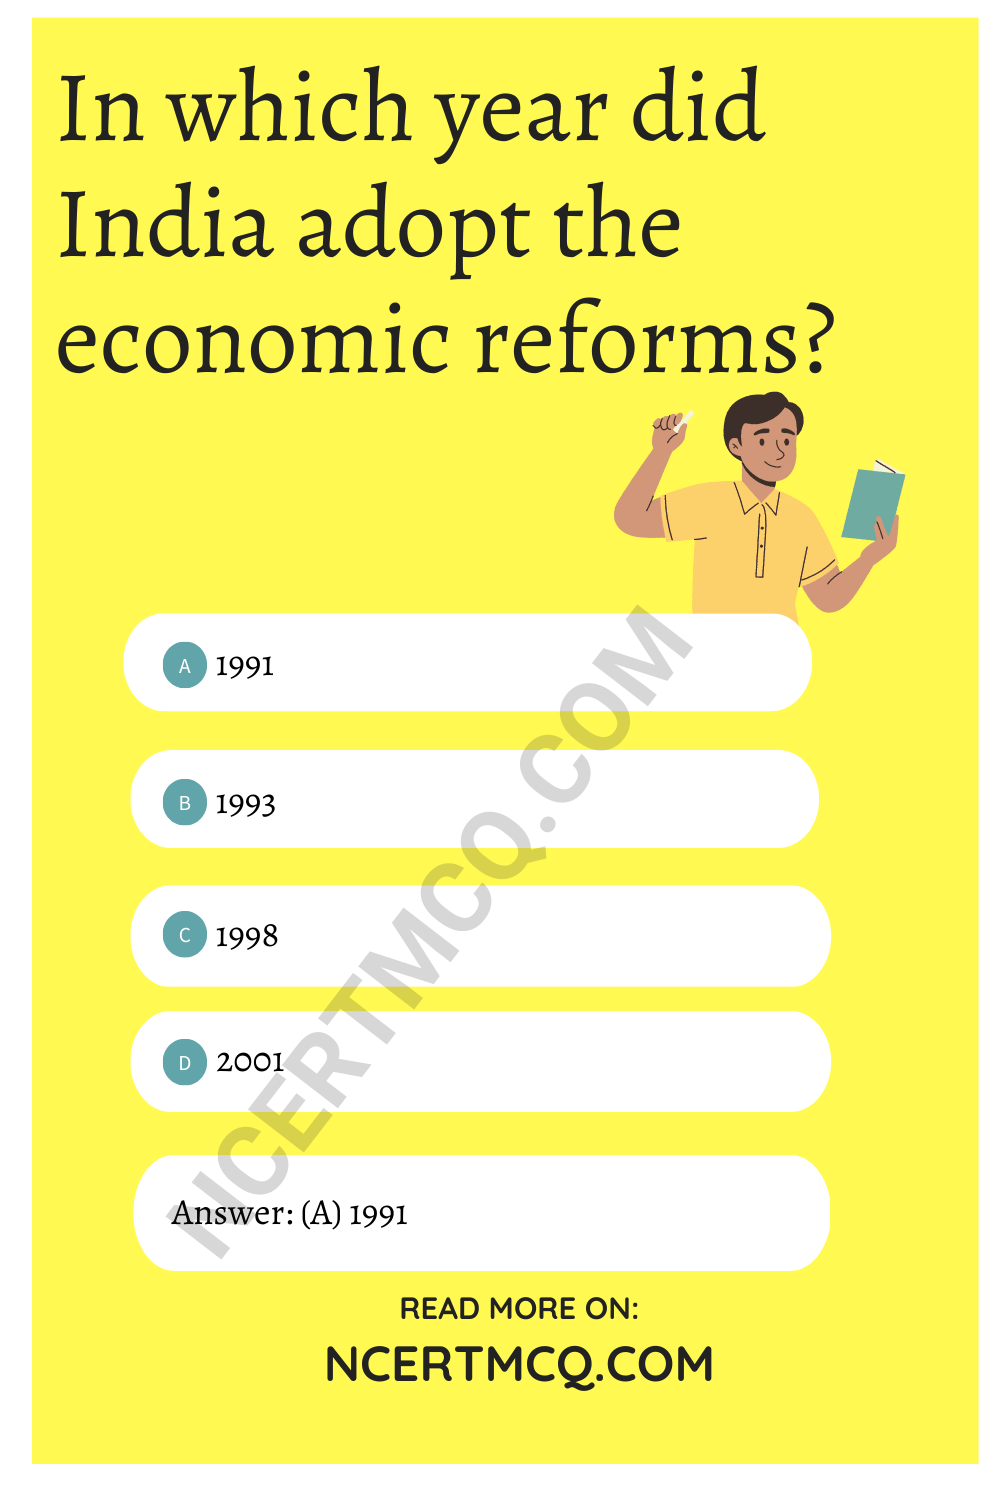 In which year did India adopt the economic reforms?